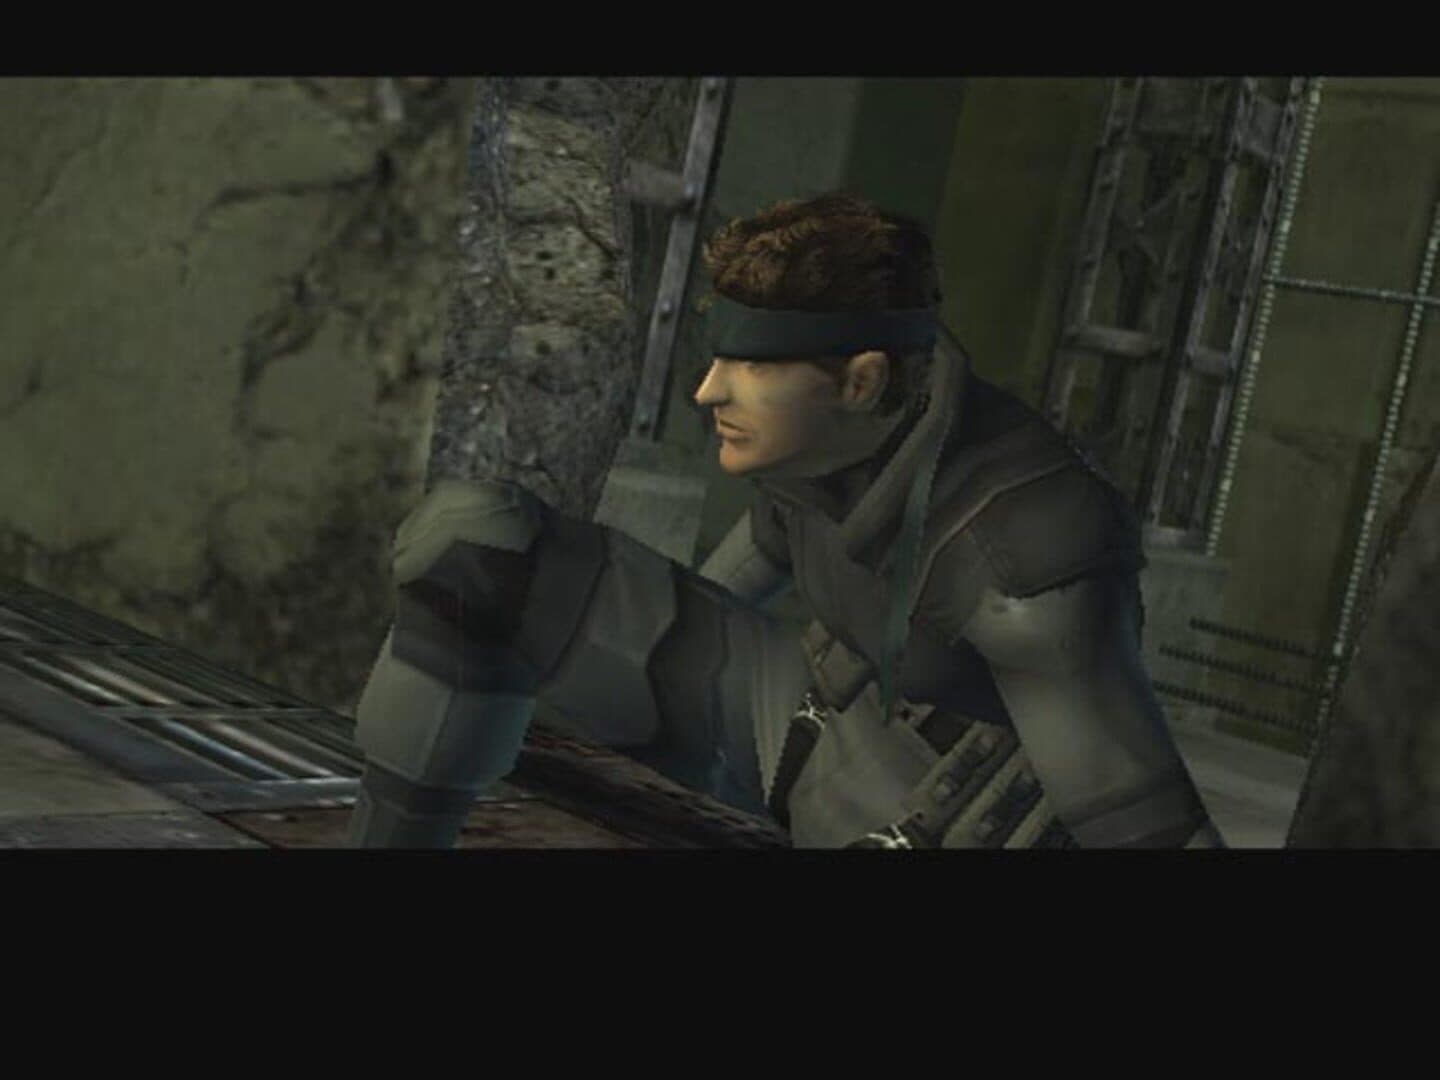 Metal Gear Solid: The Twin Snakes Image